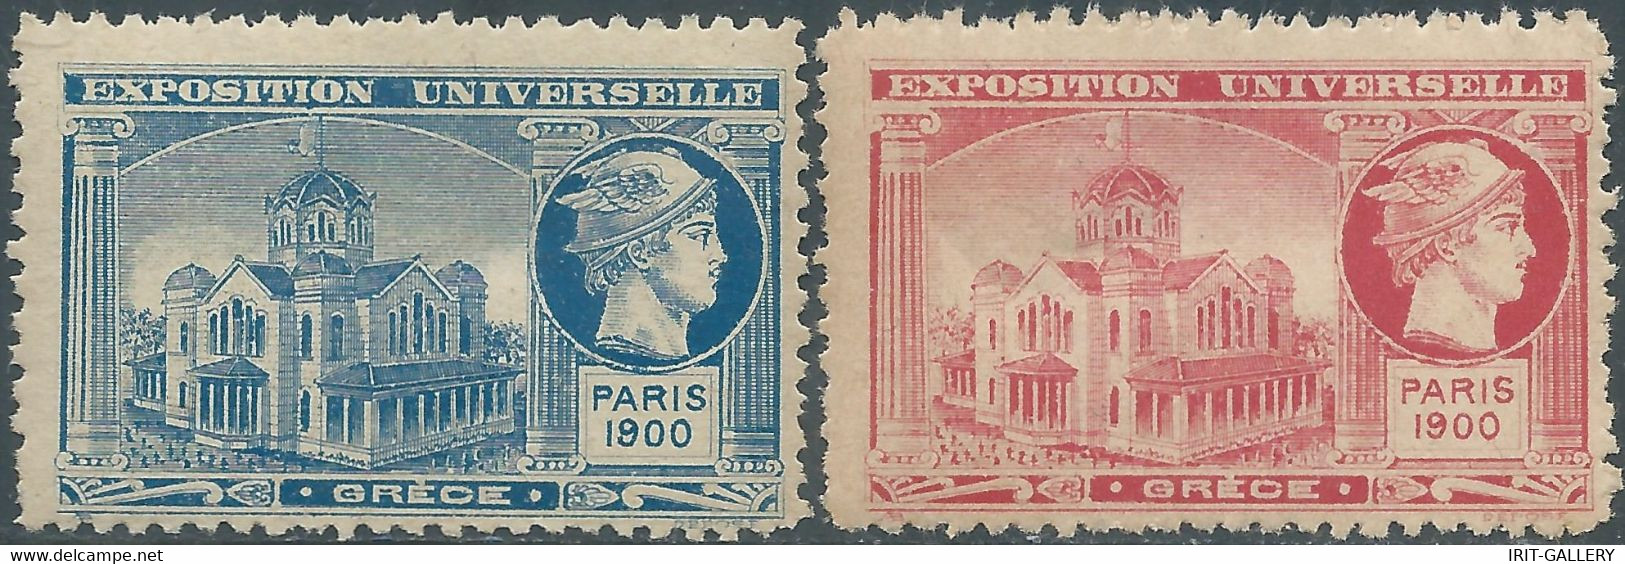 France,Paris 1900 UNIVERSAL EXHIBITION OF Greece ,Trace Of Hinged - 1900 – Paris (Frankreich)